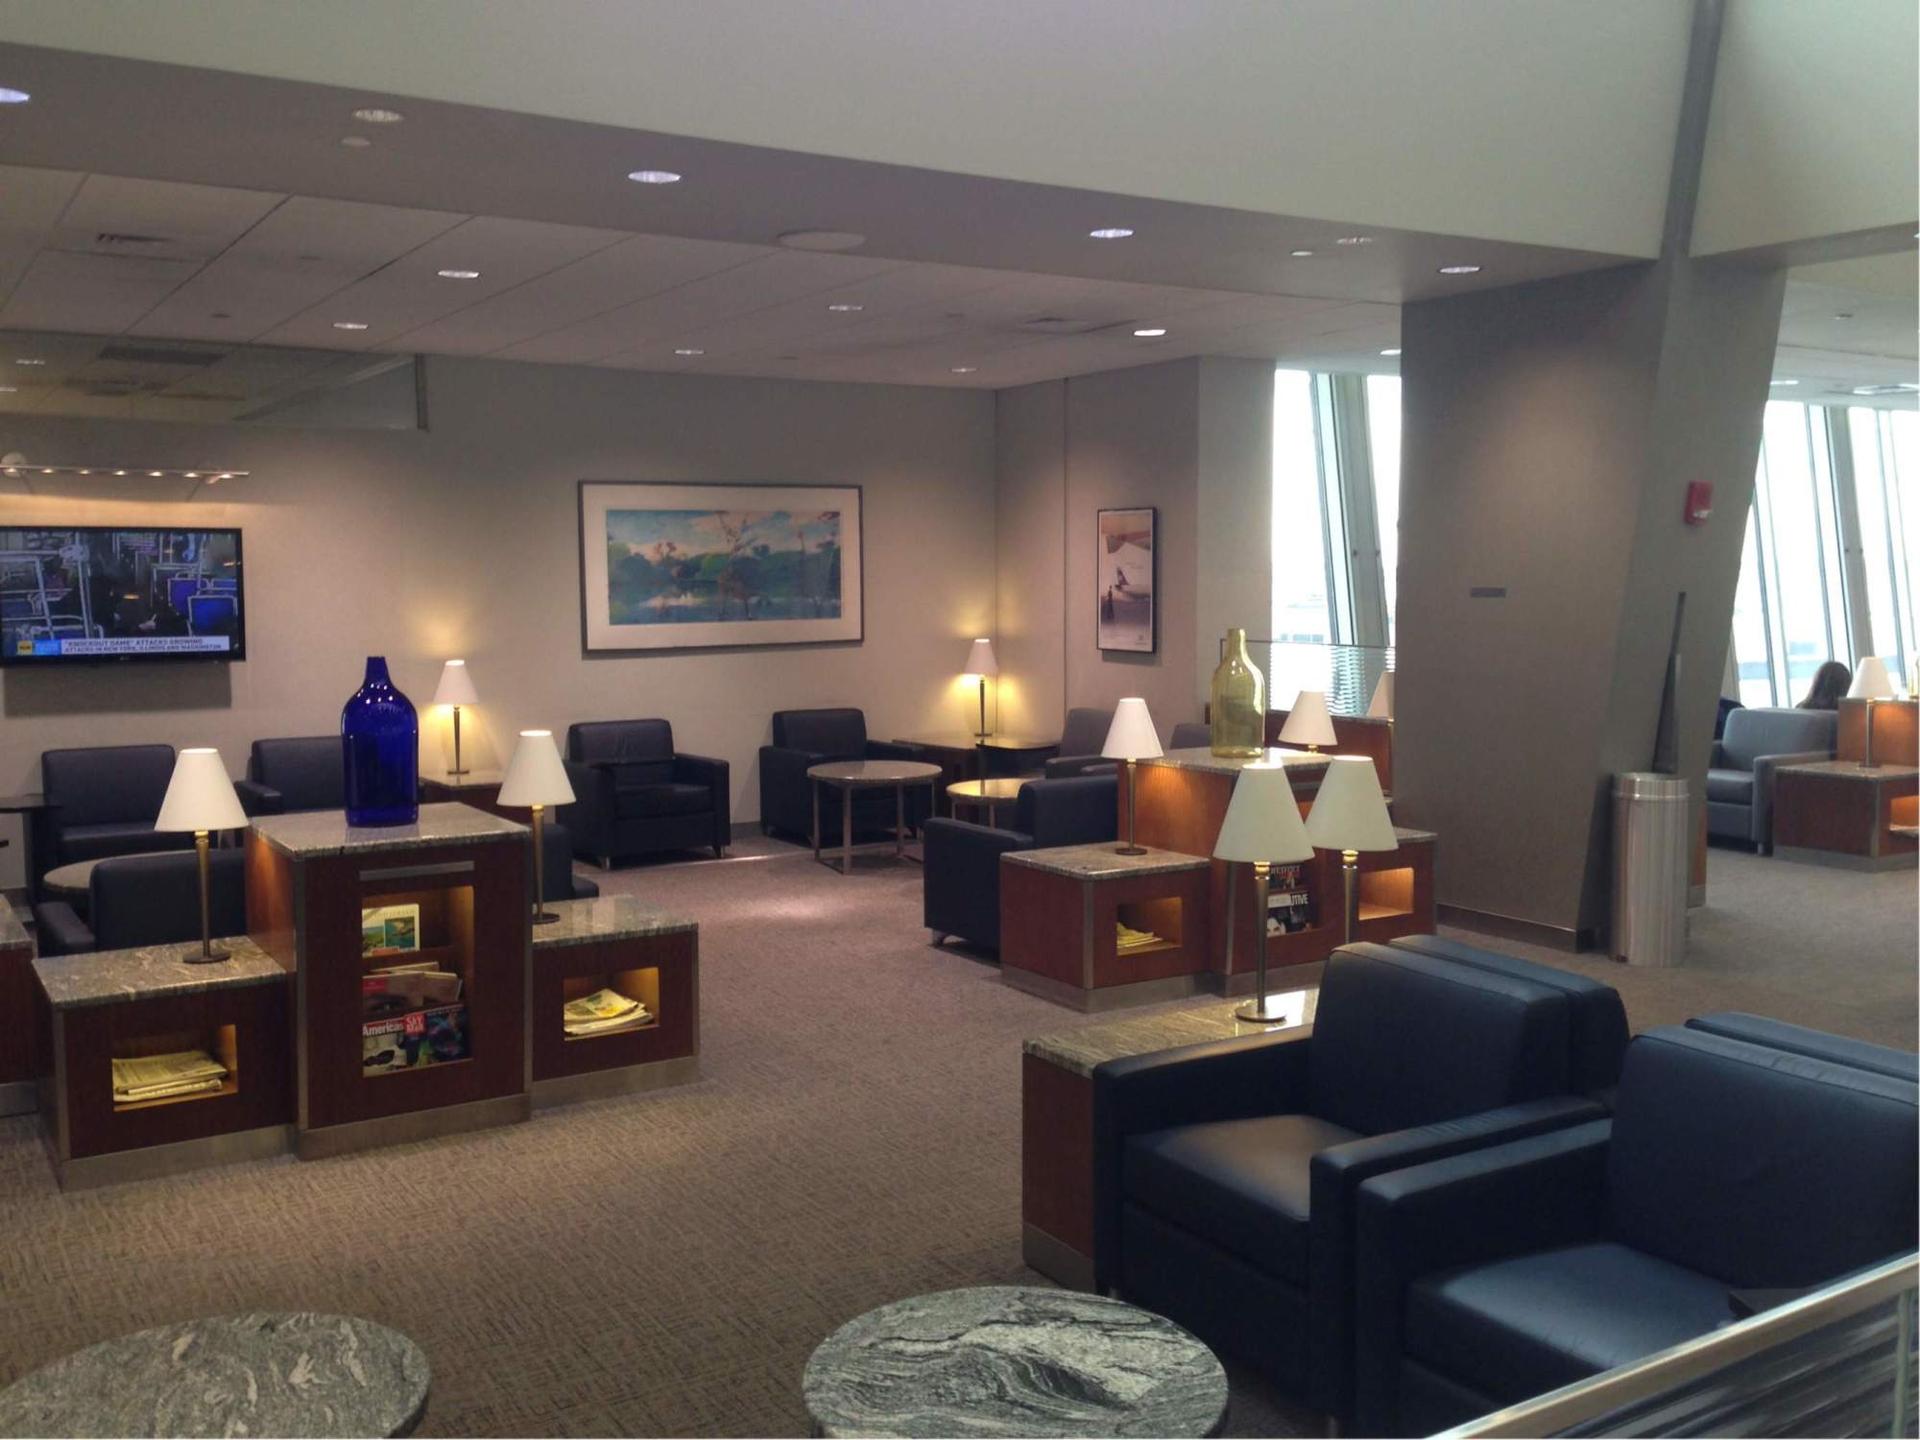 American Airlines Admirals Club image 6 of 48